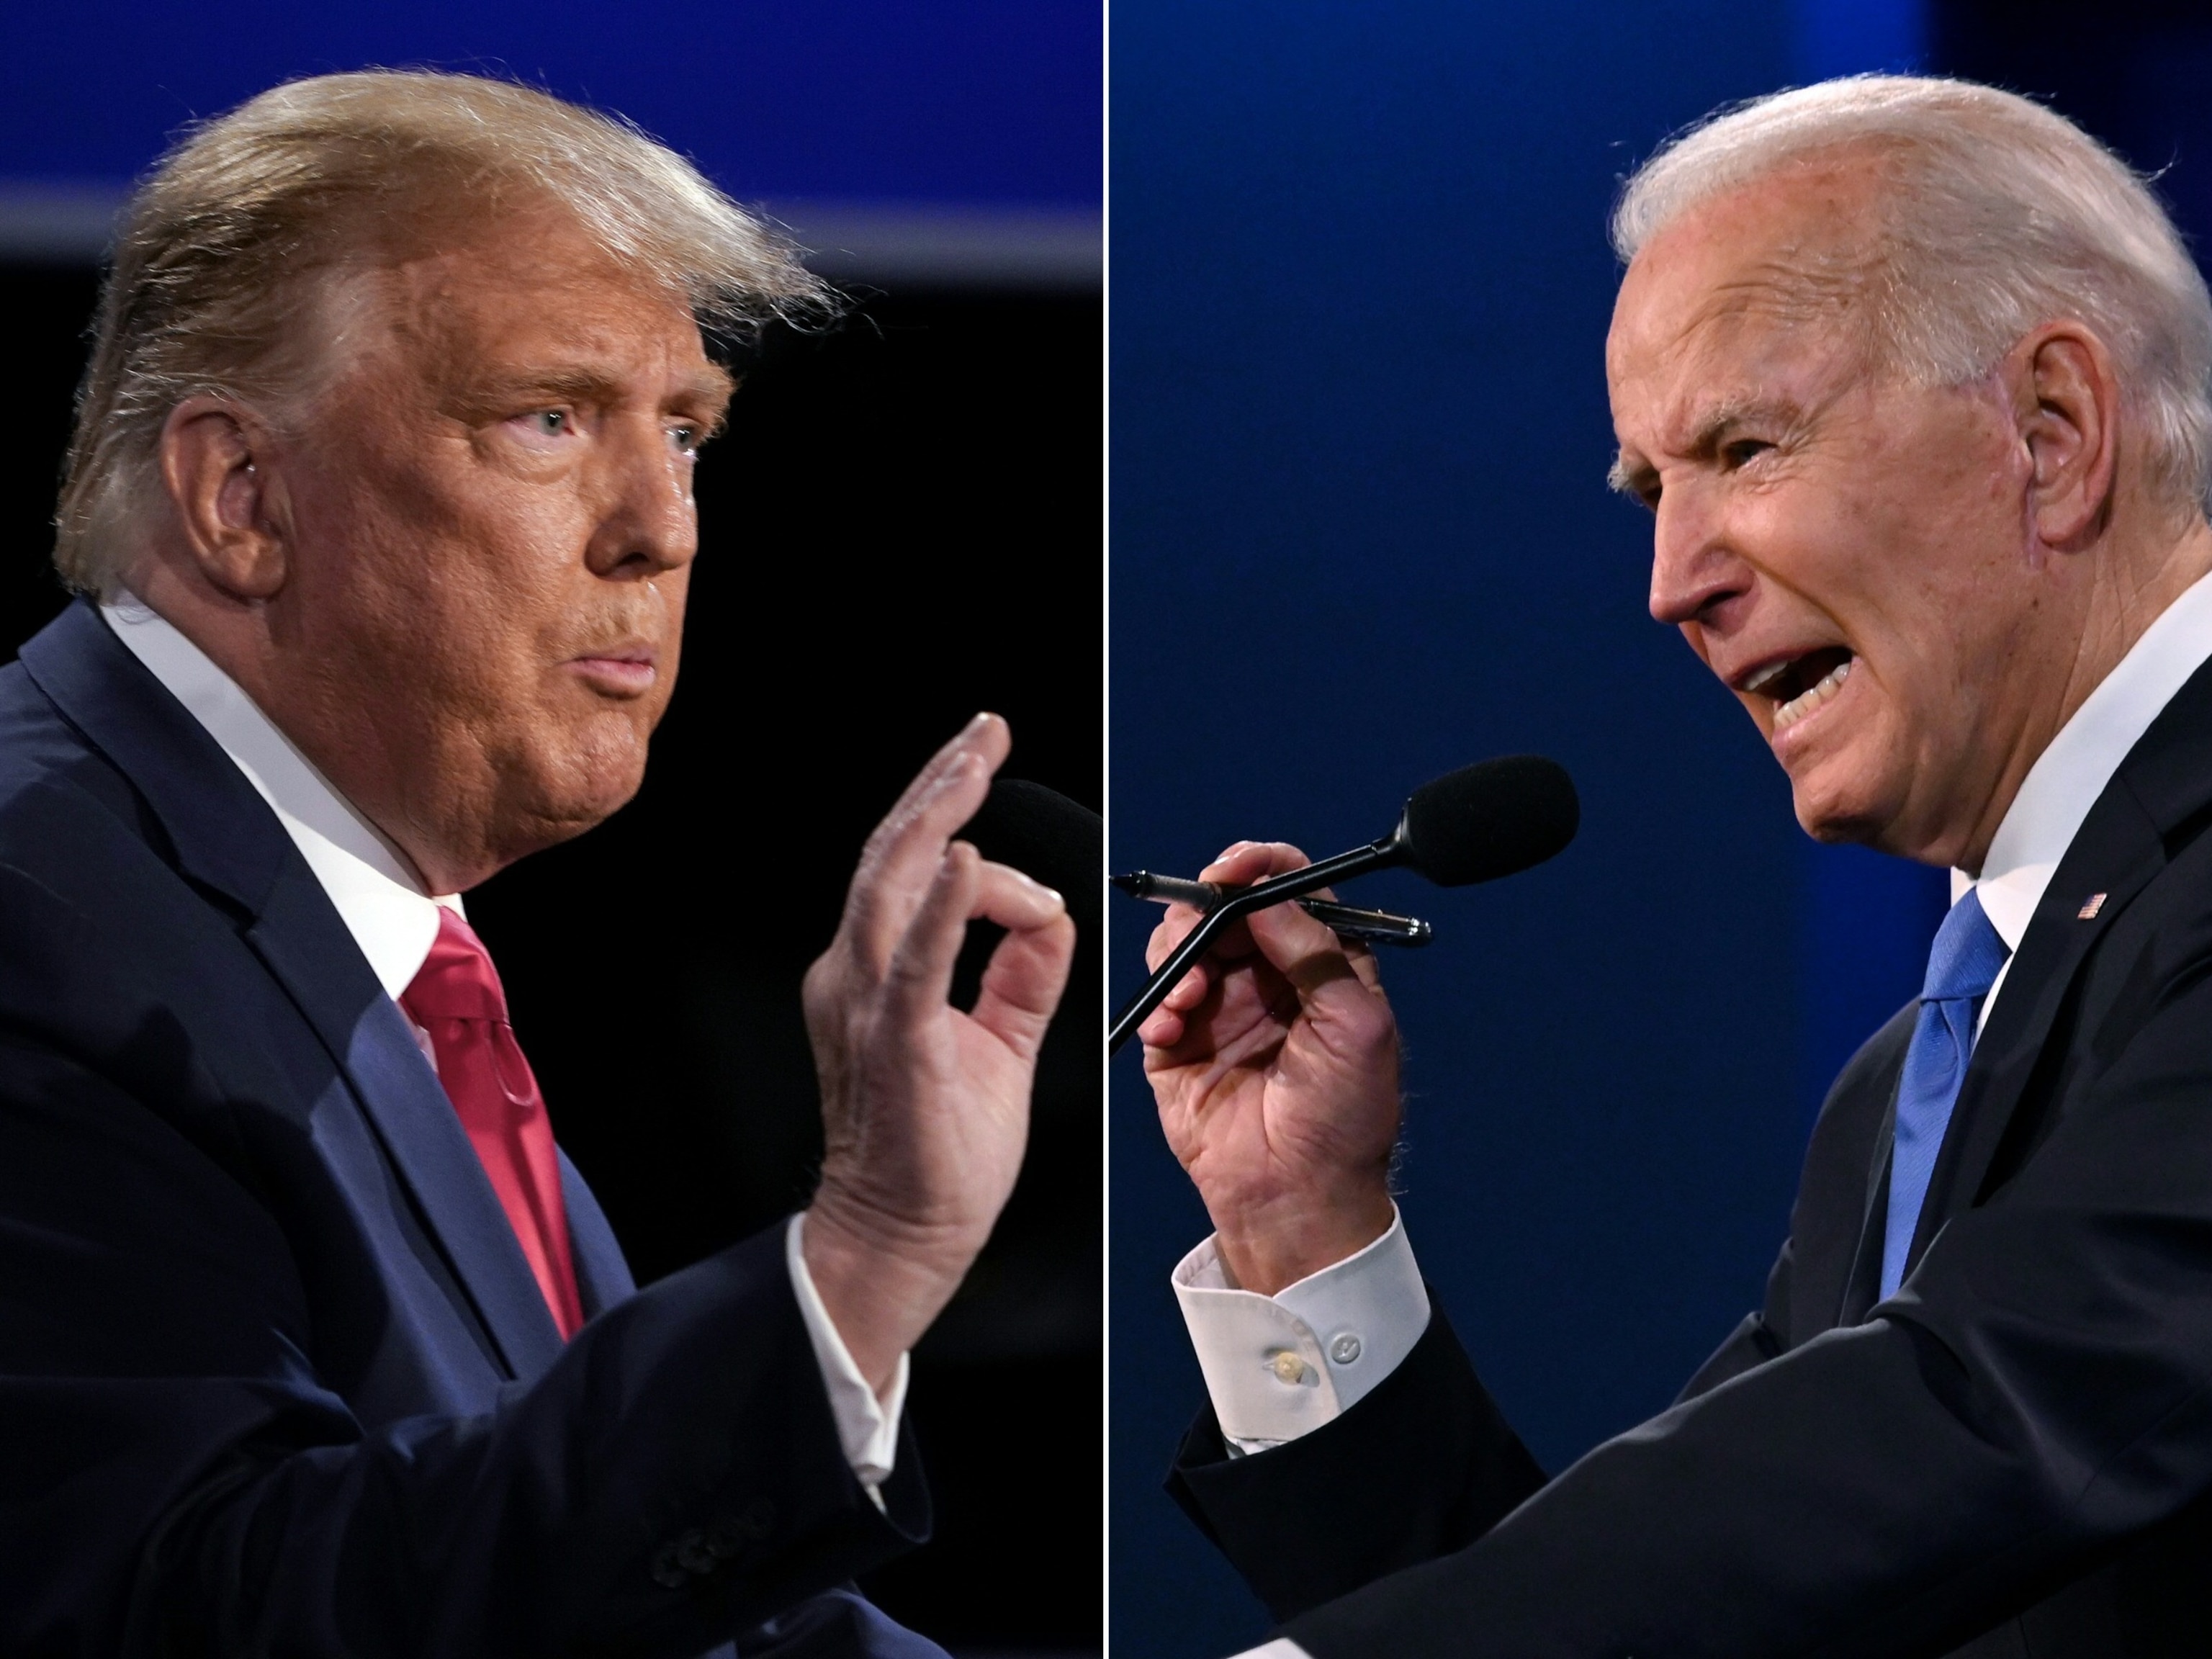 PHOTO: This combination of pictures created on Oct. 22, 2020 shows former President Donald Trump (L) and President Joe Biden during the final presidential debate at Belmont University in Nashville, Tenn., on Oct. 22, 2020.